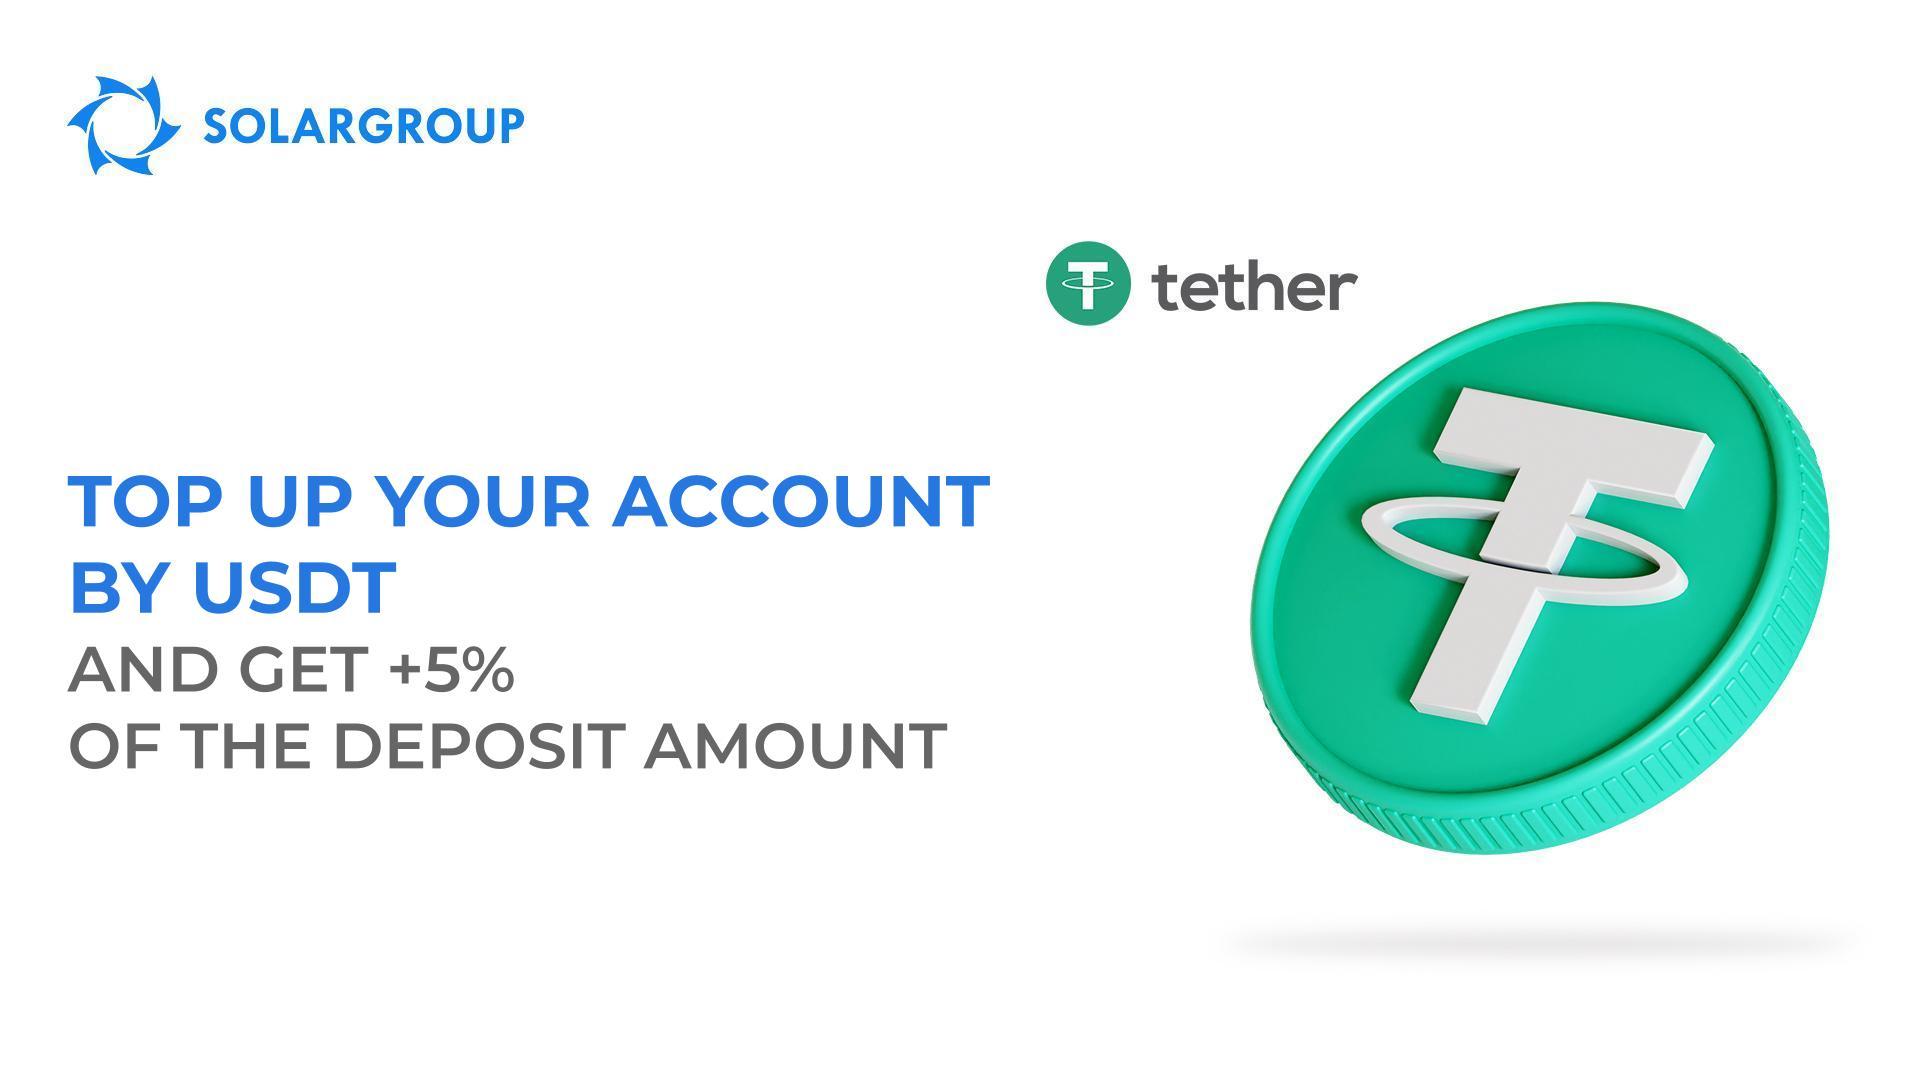 Top up your account by USDT and get +5% of the deposit amount